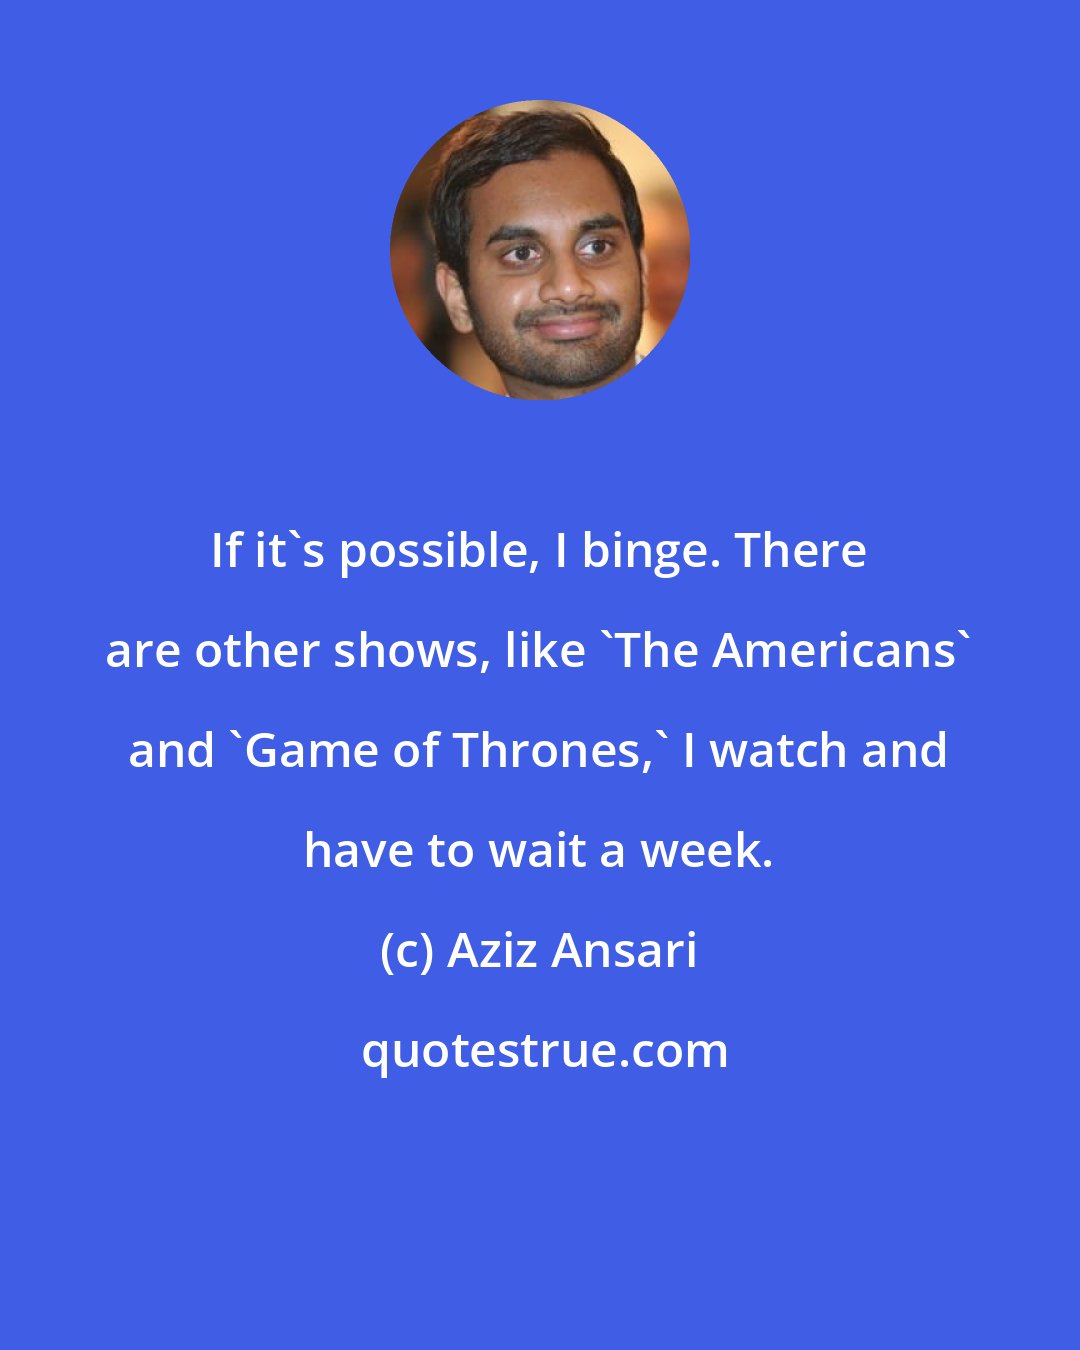 Aziz Ansari: If it's possible, I binge. There are other shows, like 'The Americans' and 'Game of Thrones,' I watch and have to wait a week.